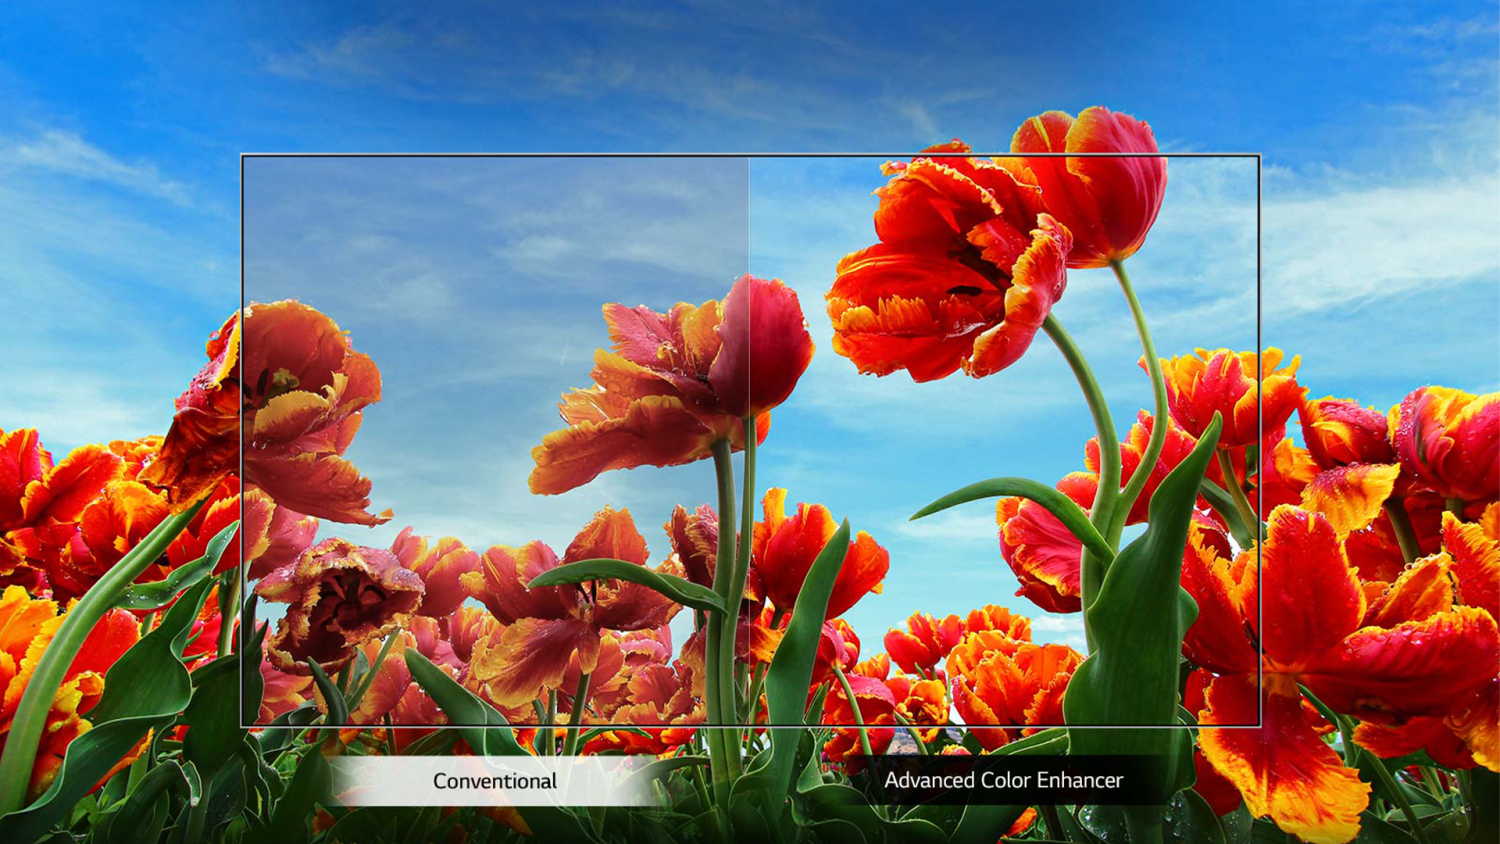 LG LED Smart TV Gallery gallery no.1